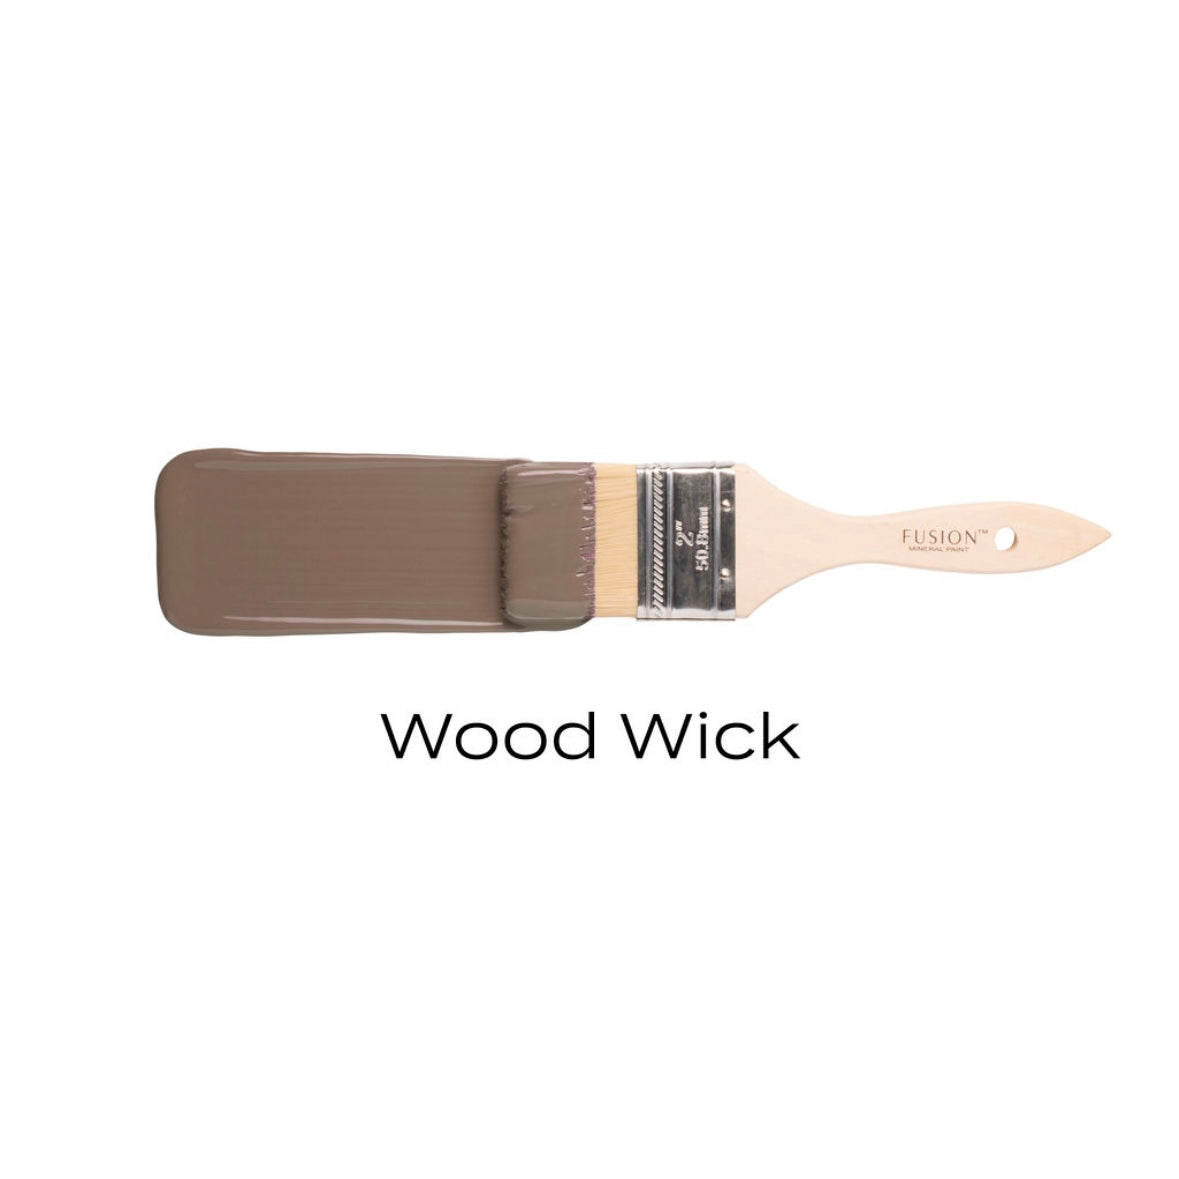 Wood Wick by Fusion